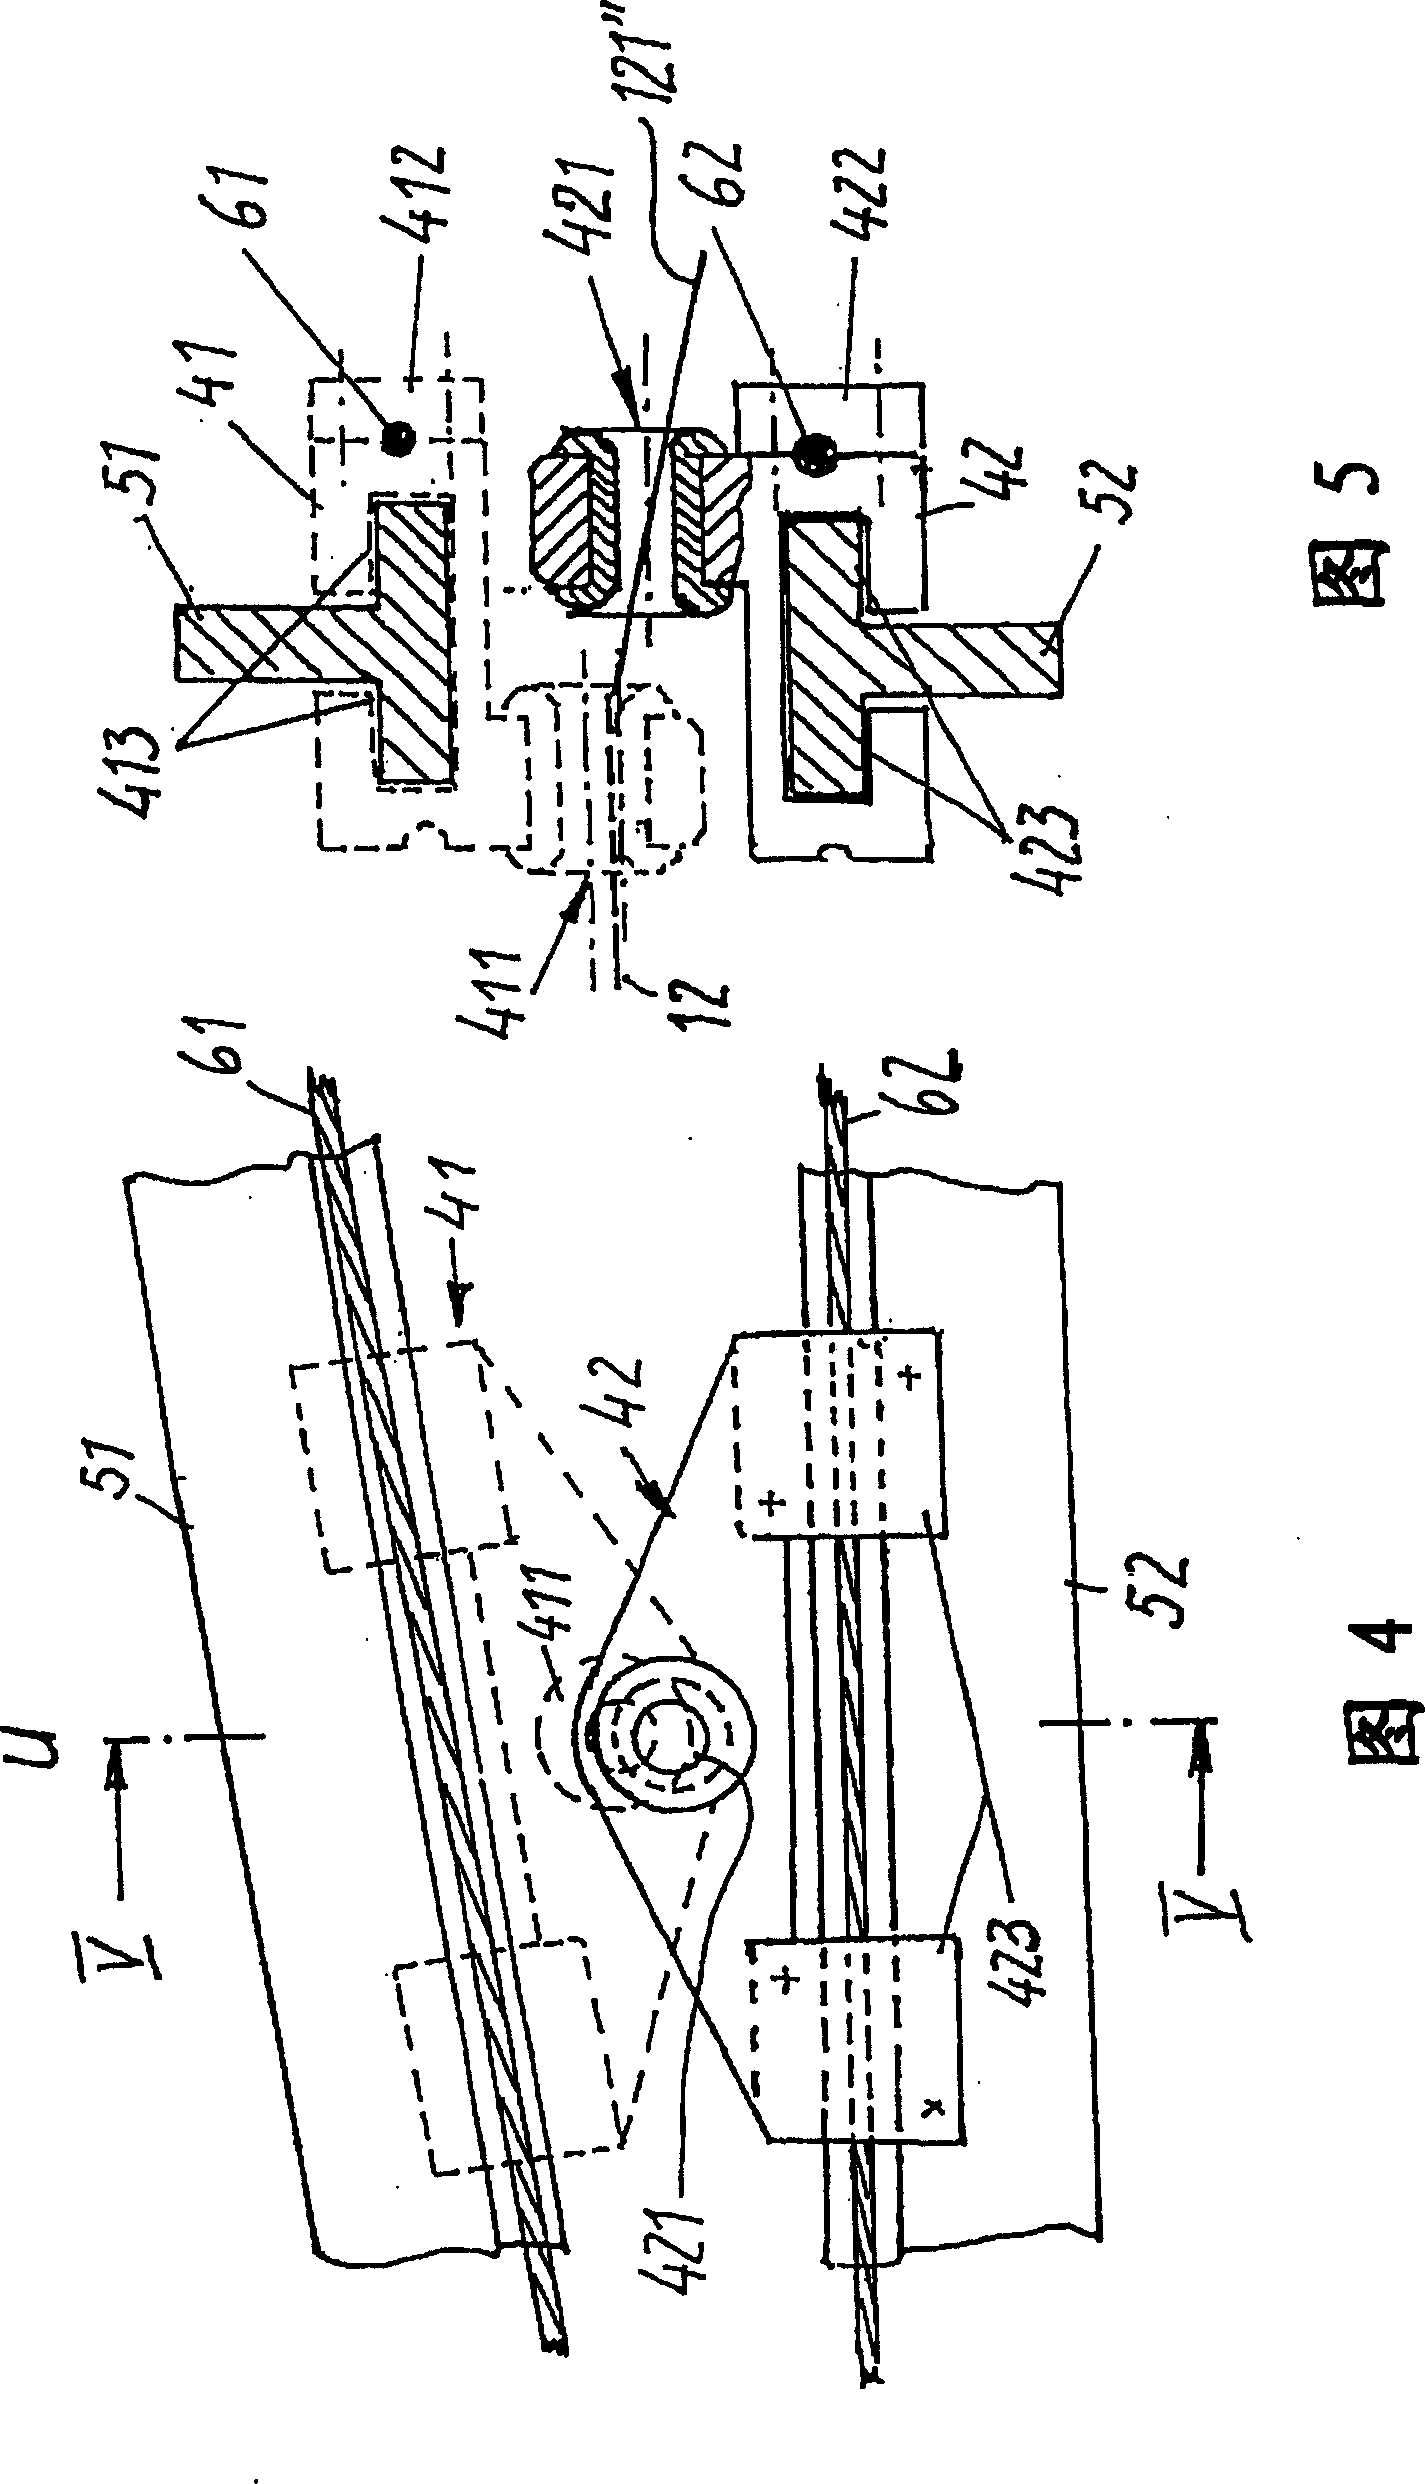 Weft selection apparatus for a weaving machine